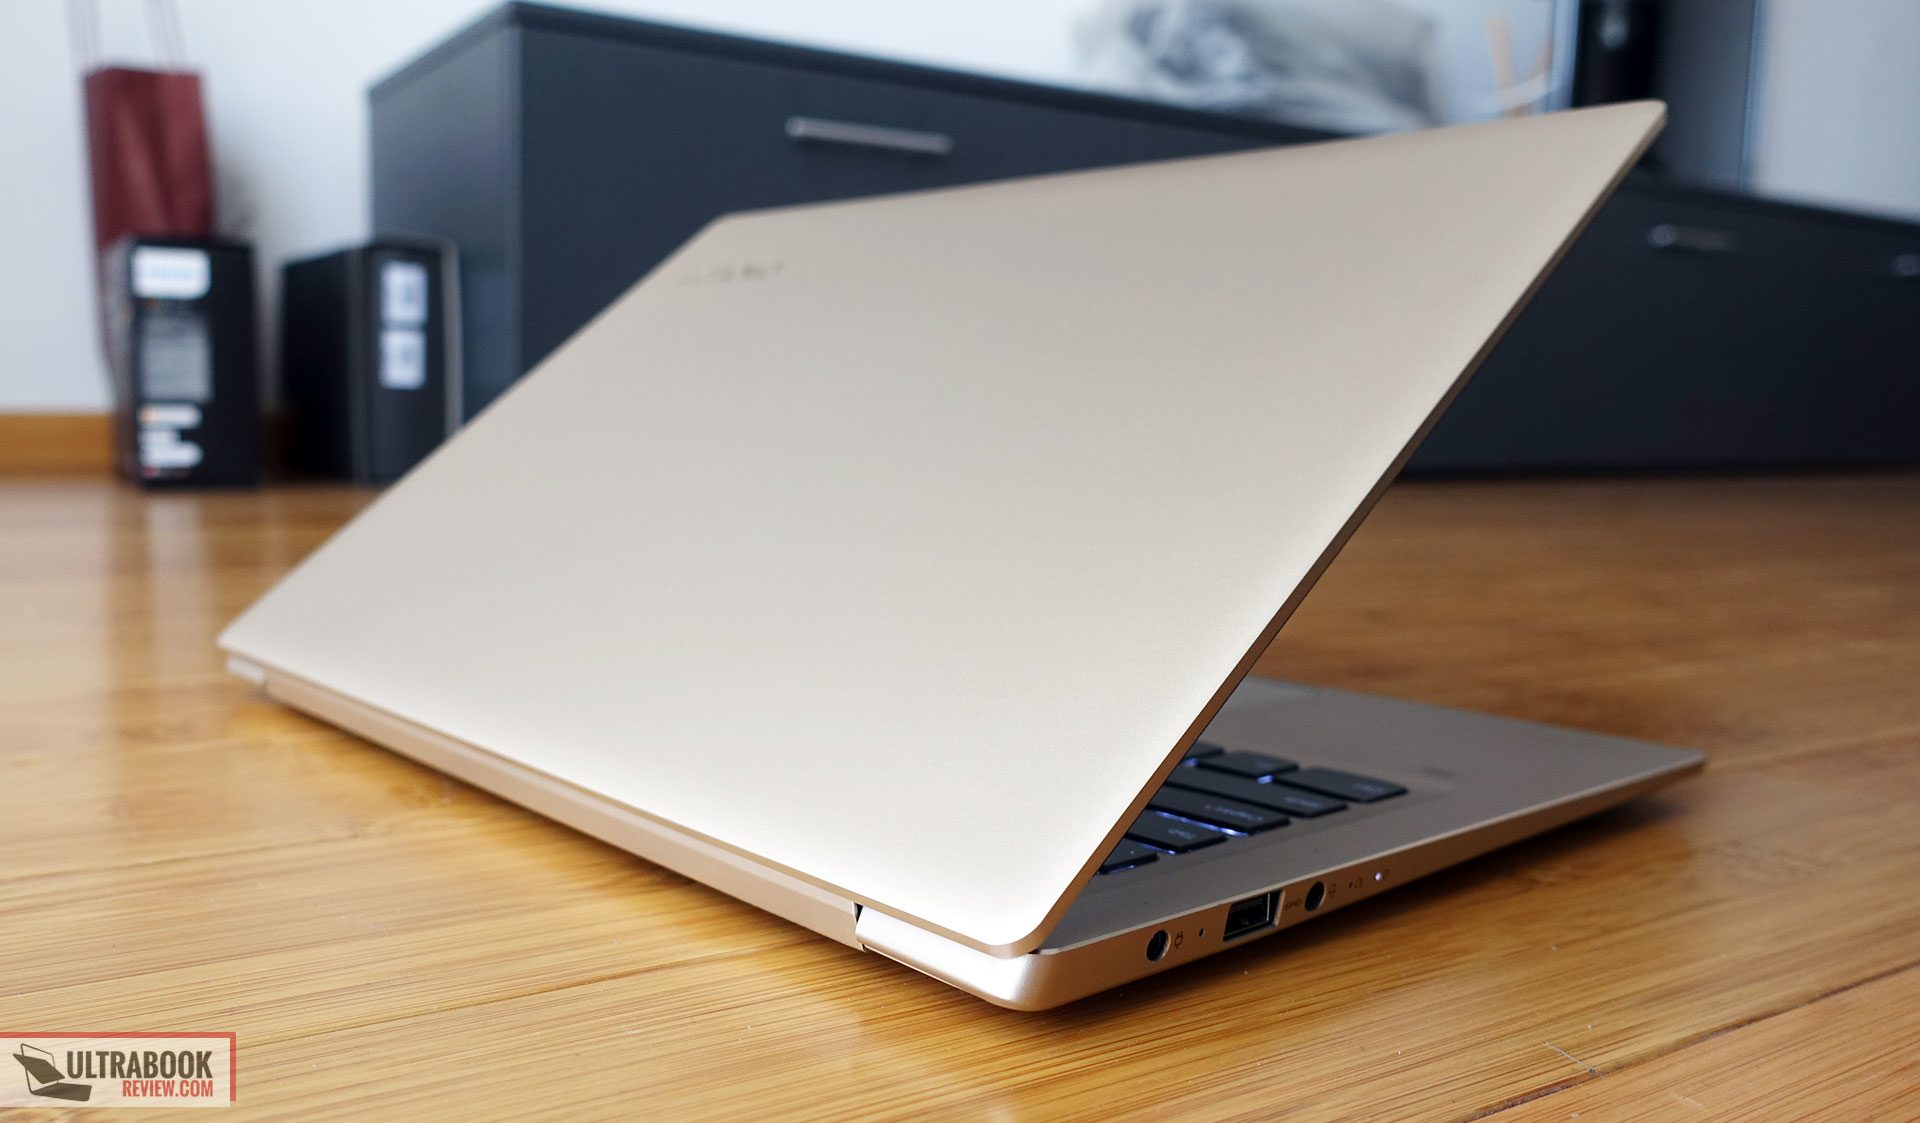 PC/タブレット ノートPC Lenovo IdeaPad 720s review - a solid all-round thin-and-light laptop